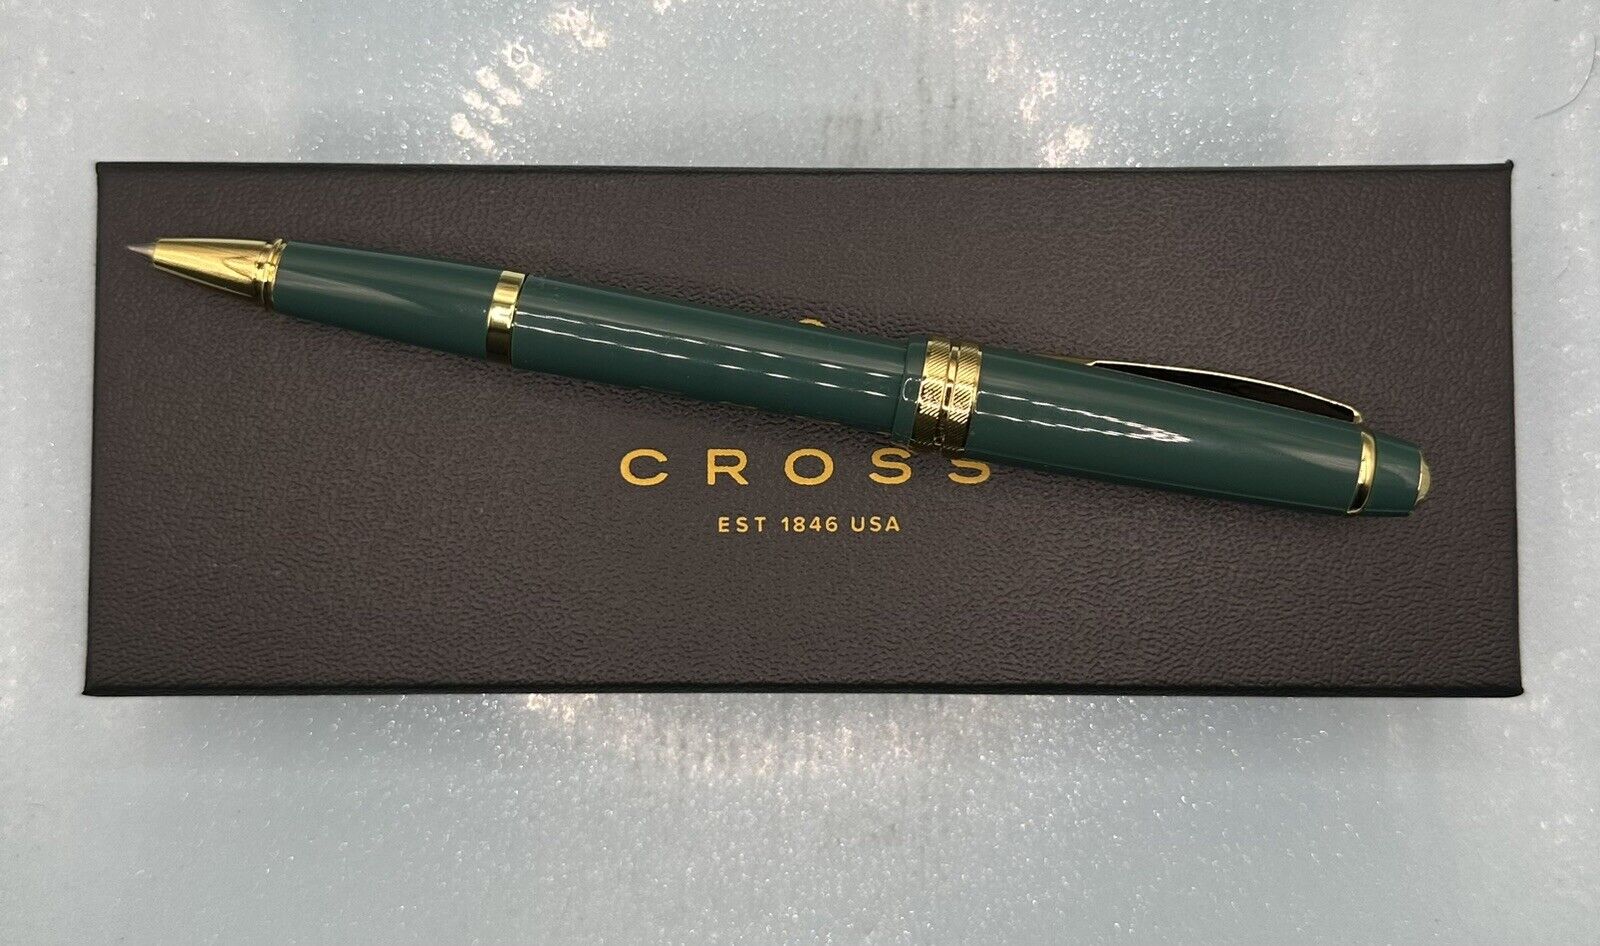 Cross Bailey Light Rolling Ball Pen Green With Gold AT0745-12 NEW In The Box